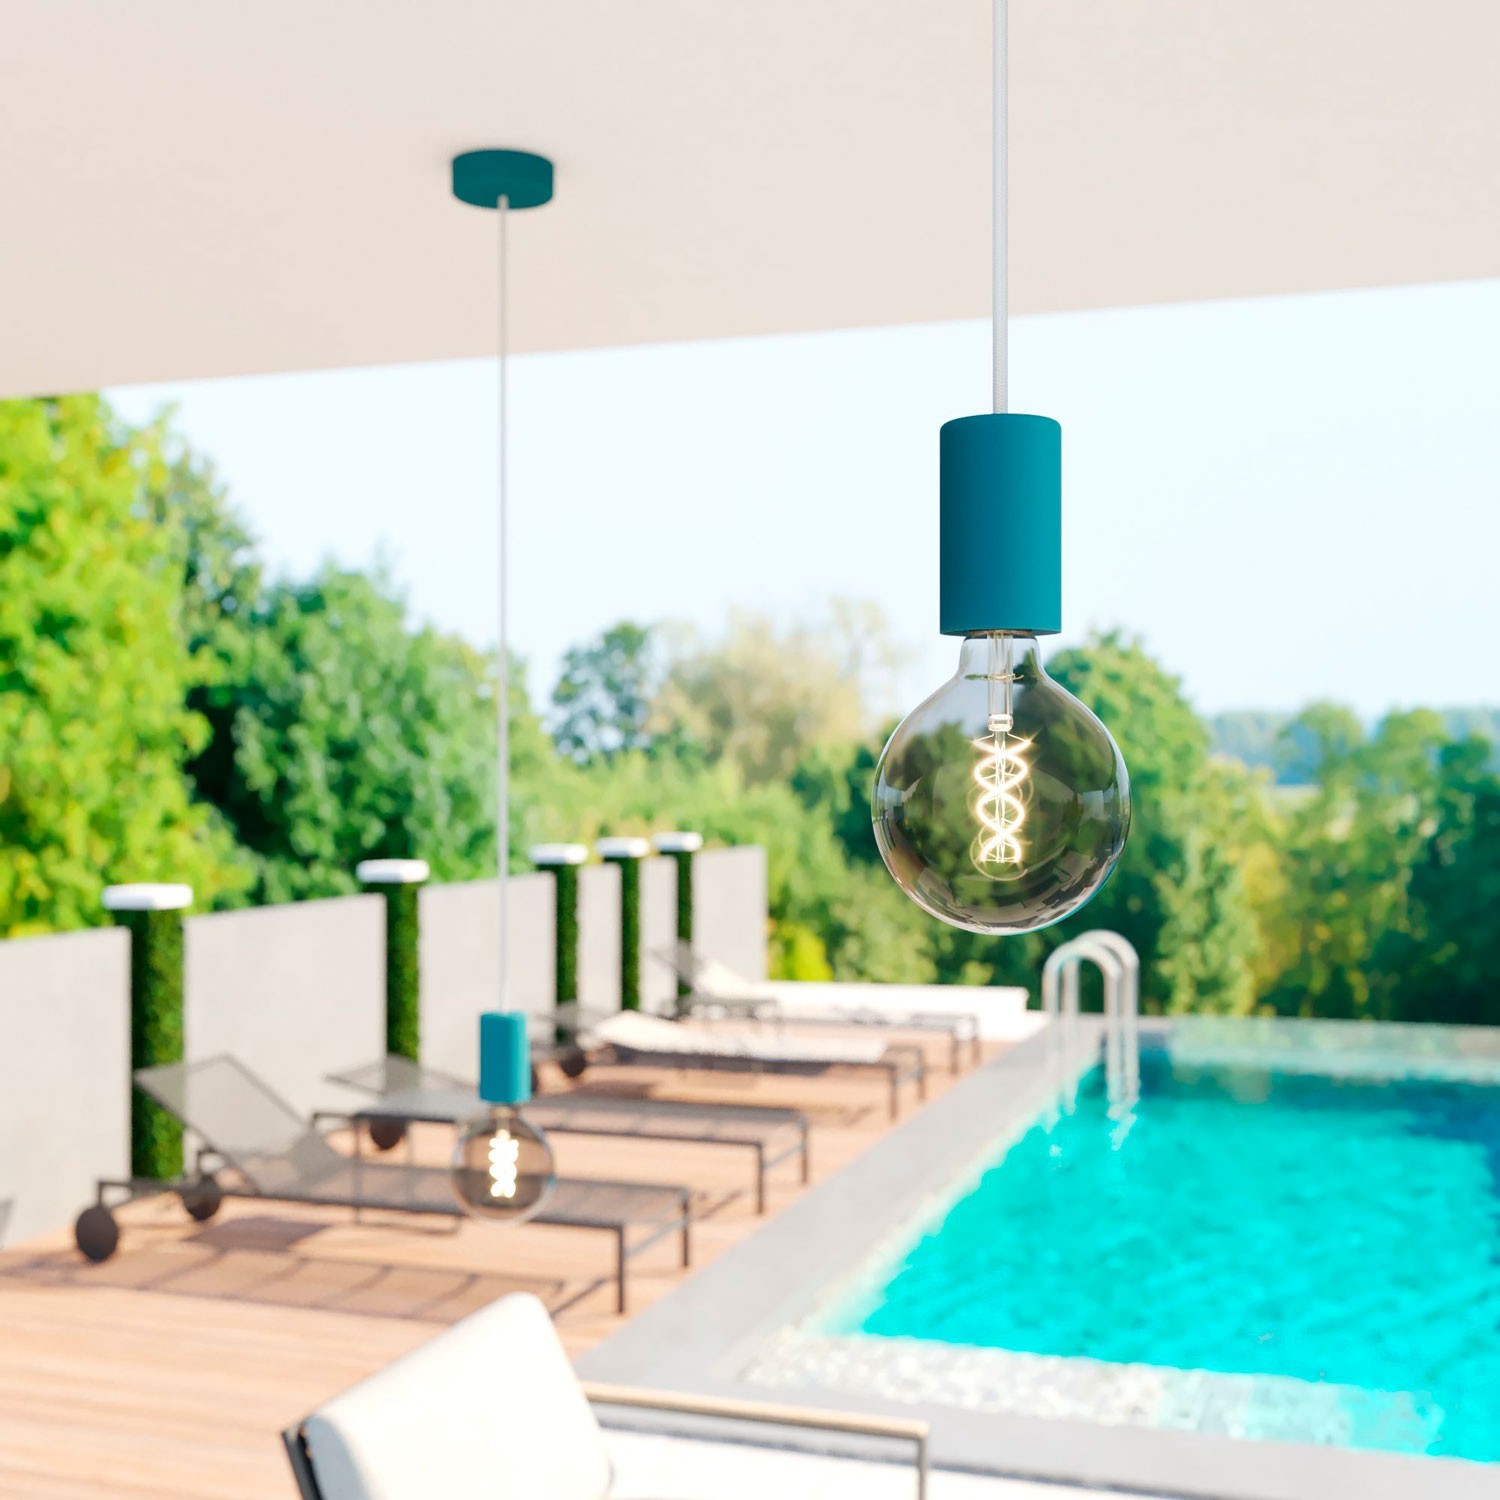 EIVA ELEGANT Outdoor pendant lamp with 1,5 mt fabric cable, silicone ceiling rose and lamp holder IP65 water resistant